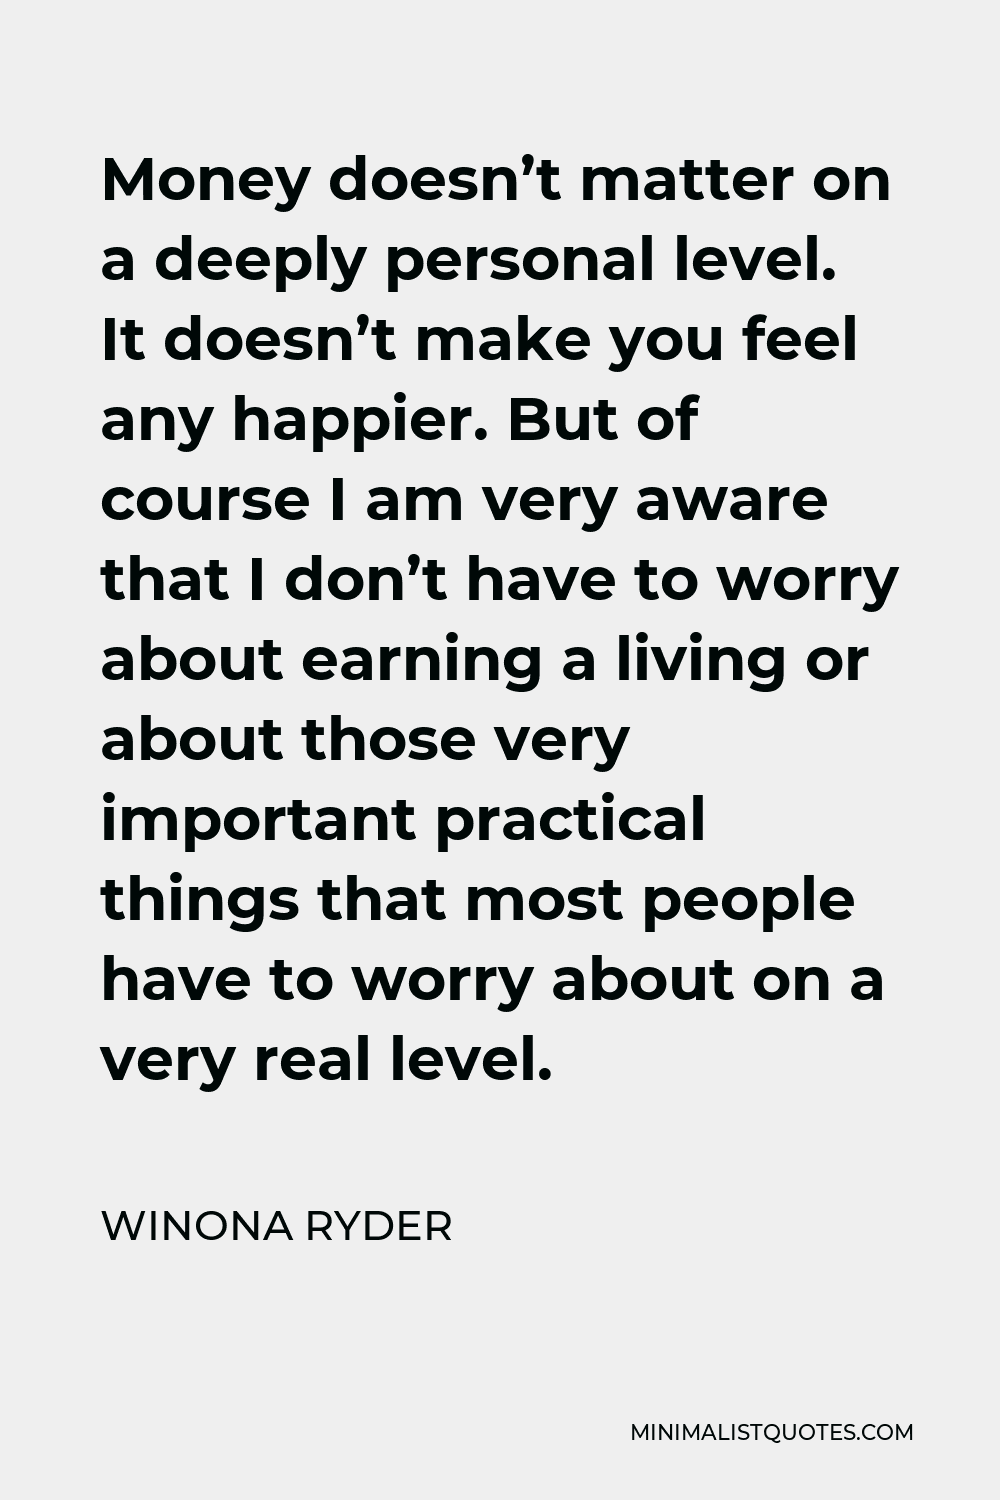 Winona Ryder Quote - Money doesn’t matter on a deeply personal level. It doesn’t make you feel any happier. But of course I am very aware that I don’t have to worry about earning a living or about those very important practical things that most people have to worry about on a very real level.